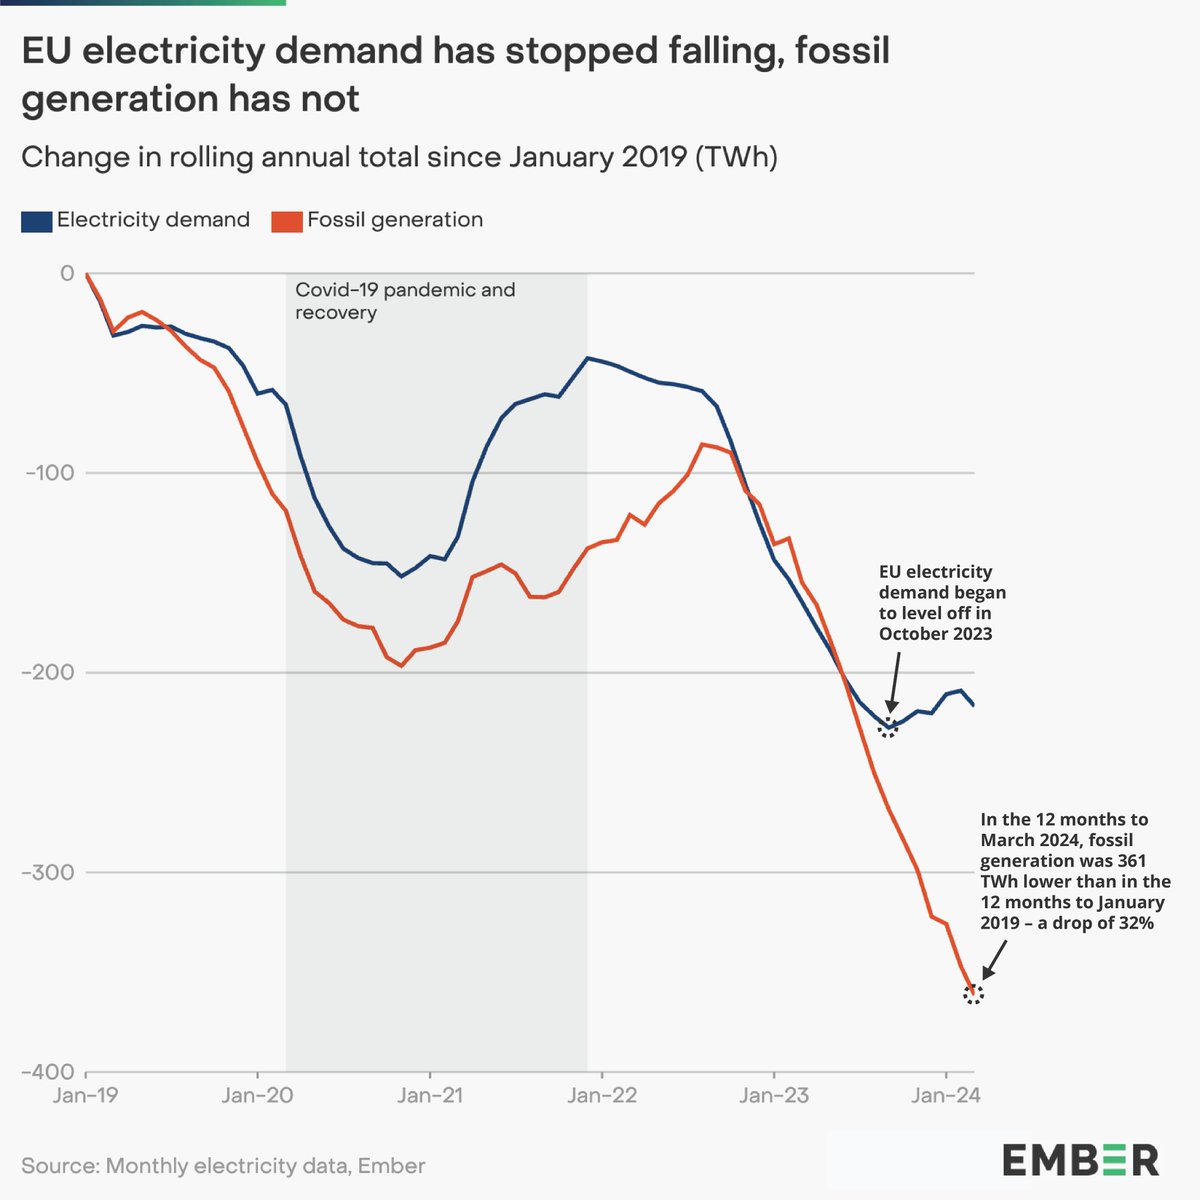 NEW from Ember electricity data: Electricity demand has stabilised in the EU, but fossil generation keeps falling ⚡🇪🇺 1/4